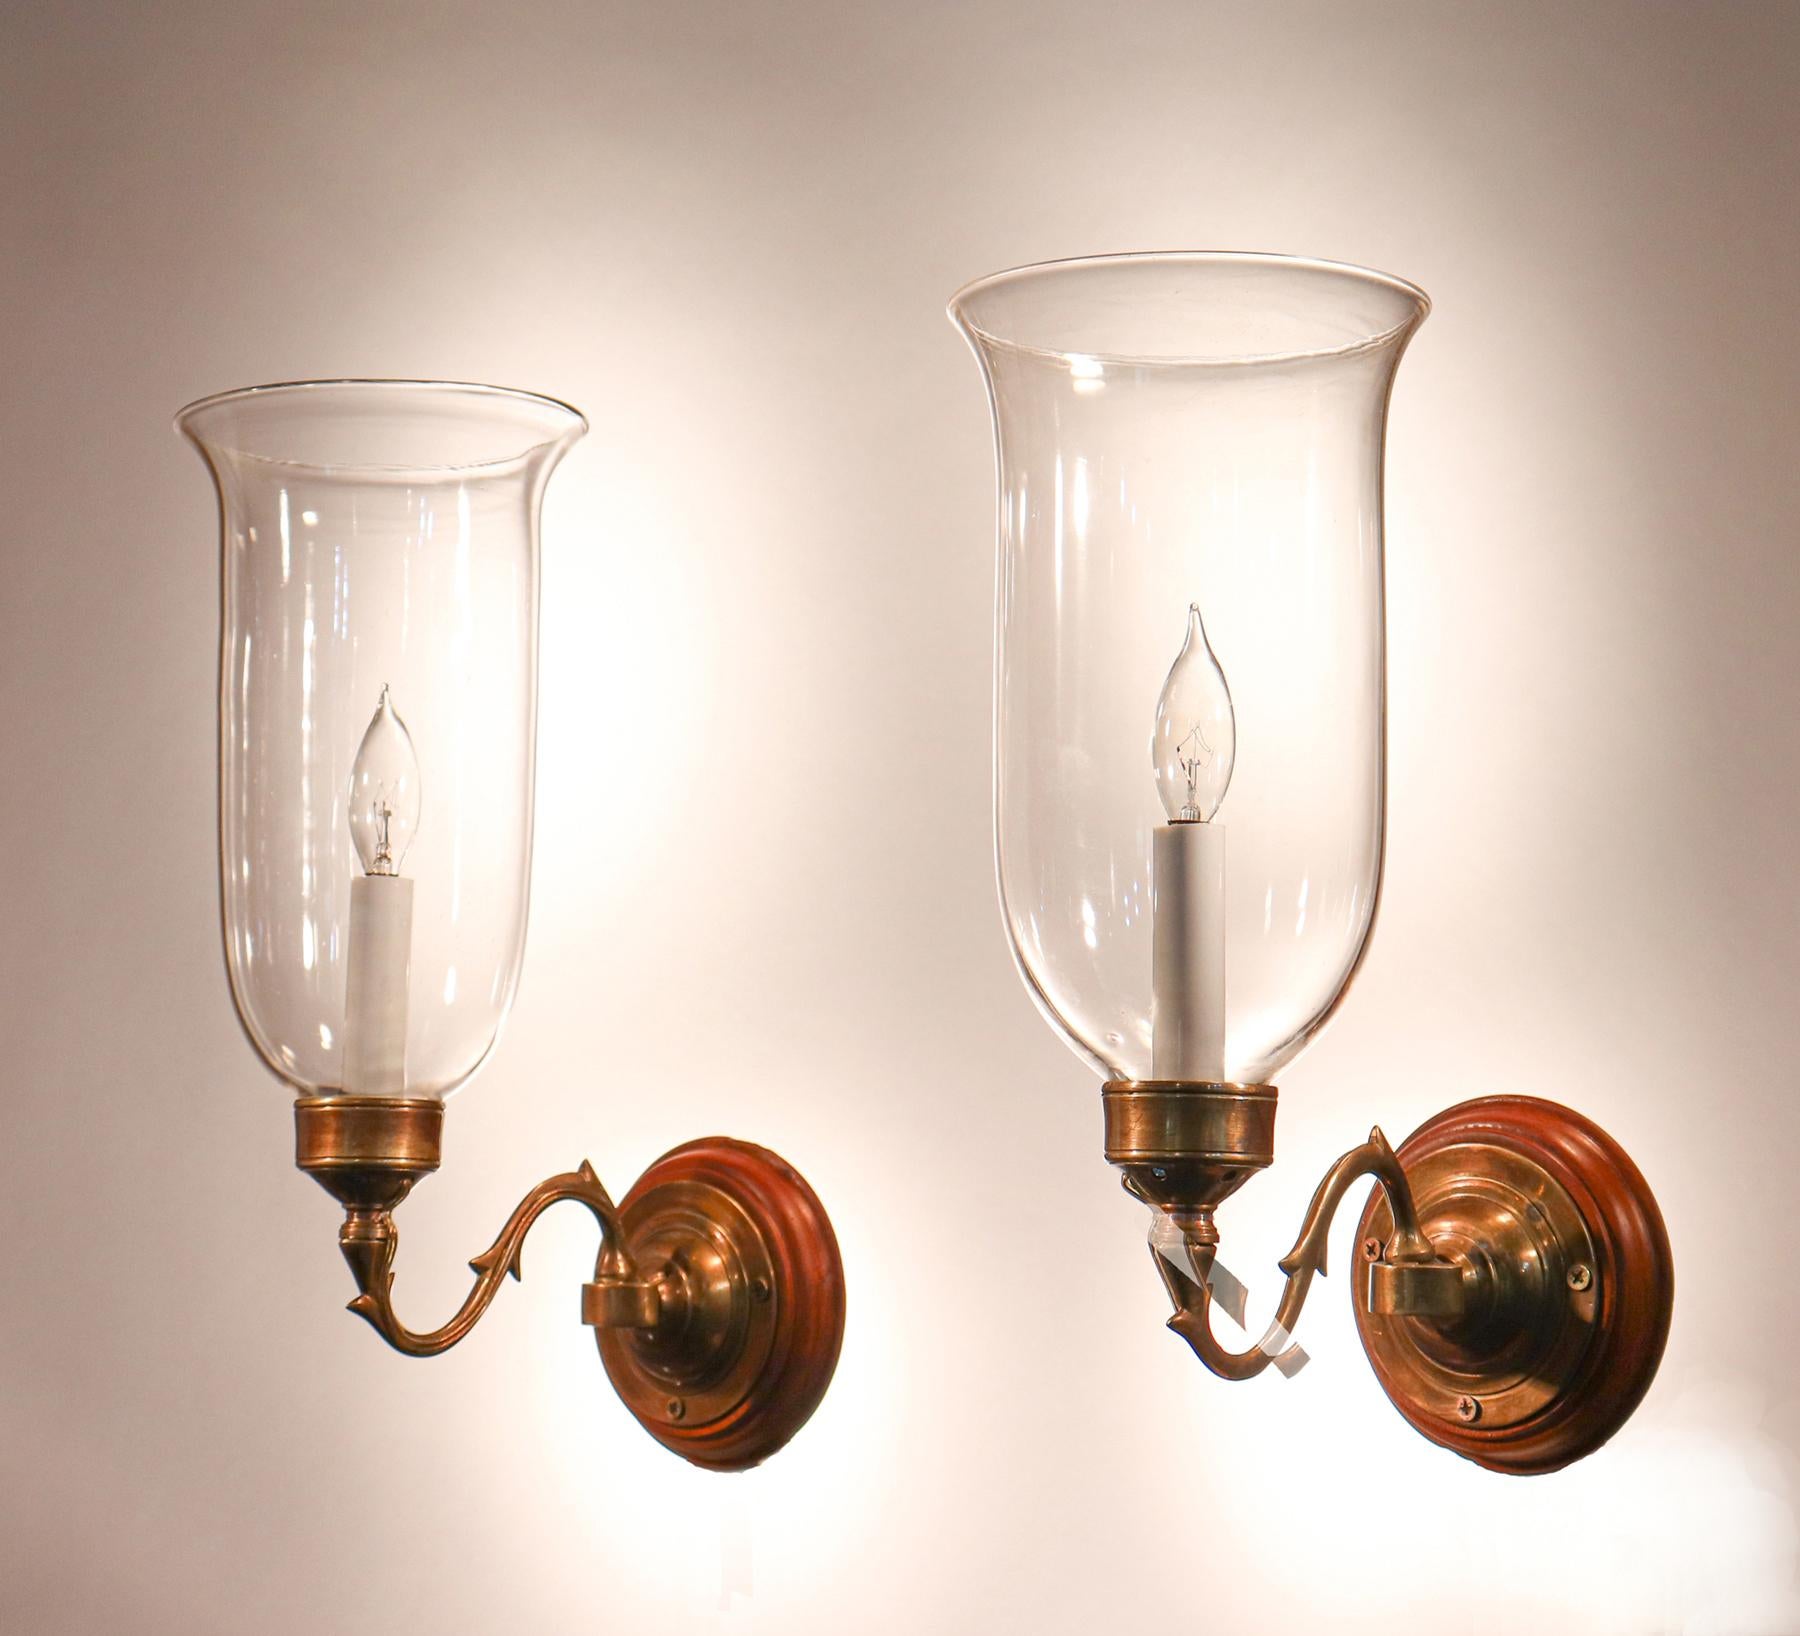 Pair of superb quality hand blown glass hurricane shades from England, circa 1880. These flared shades have classic form, and are well-suited for the projection of the custom-fabricated brass sconce arms. The sconce arms and mahogany backplates are